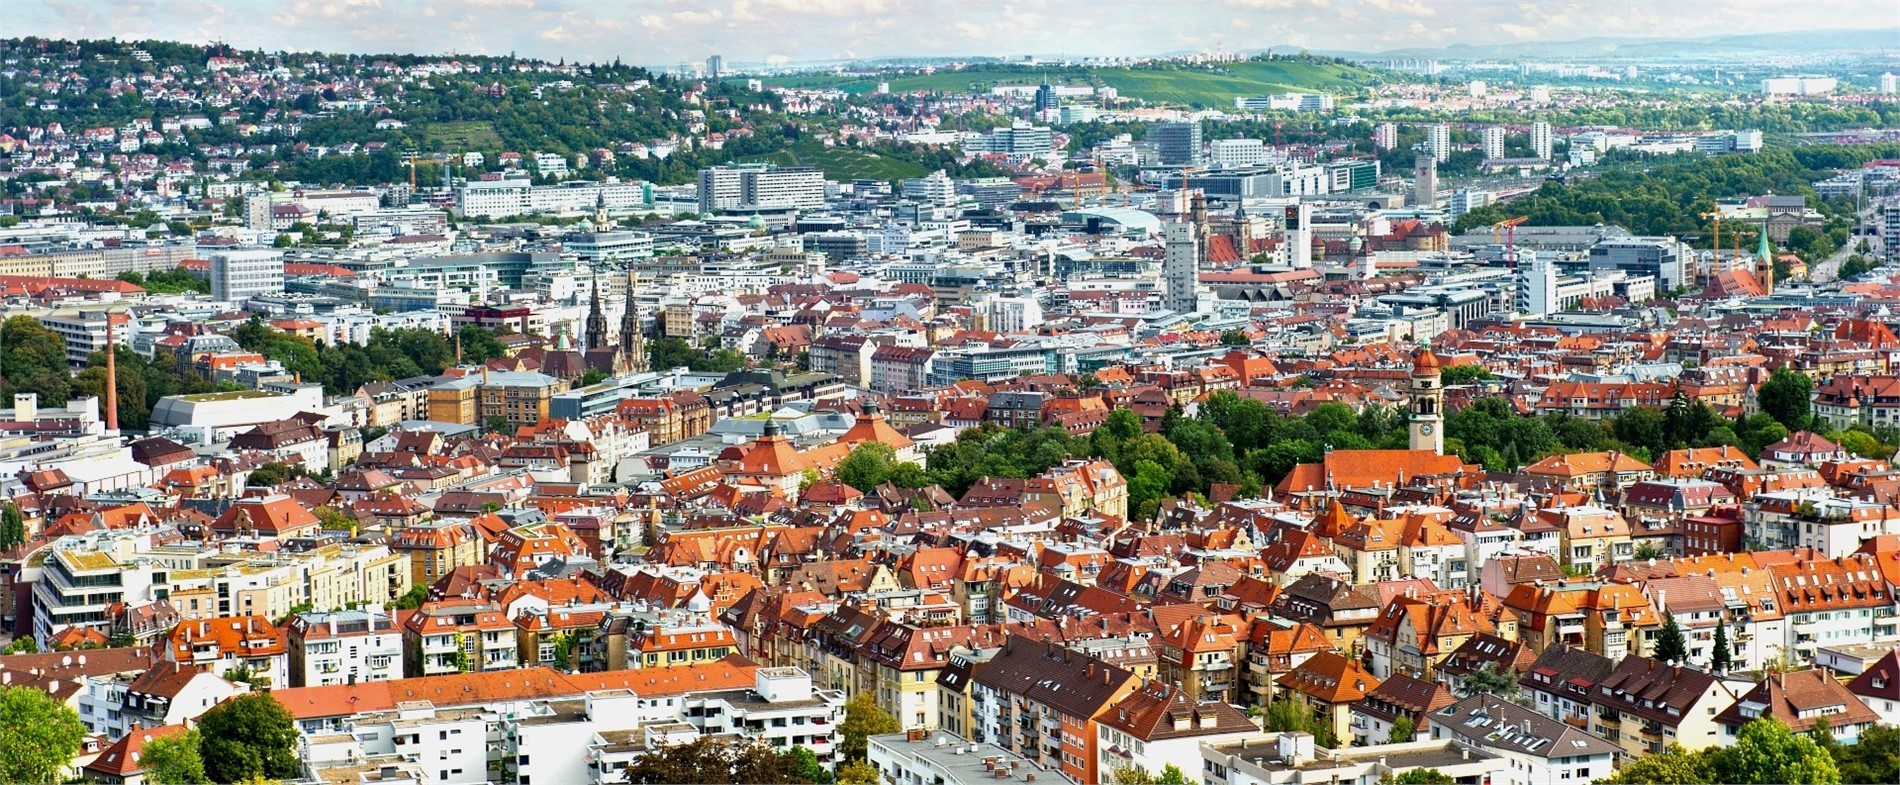 Hotels and accommodation in Stuttgart, Germany